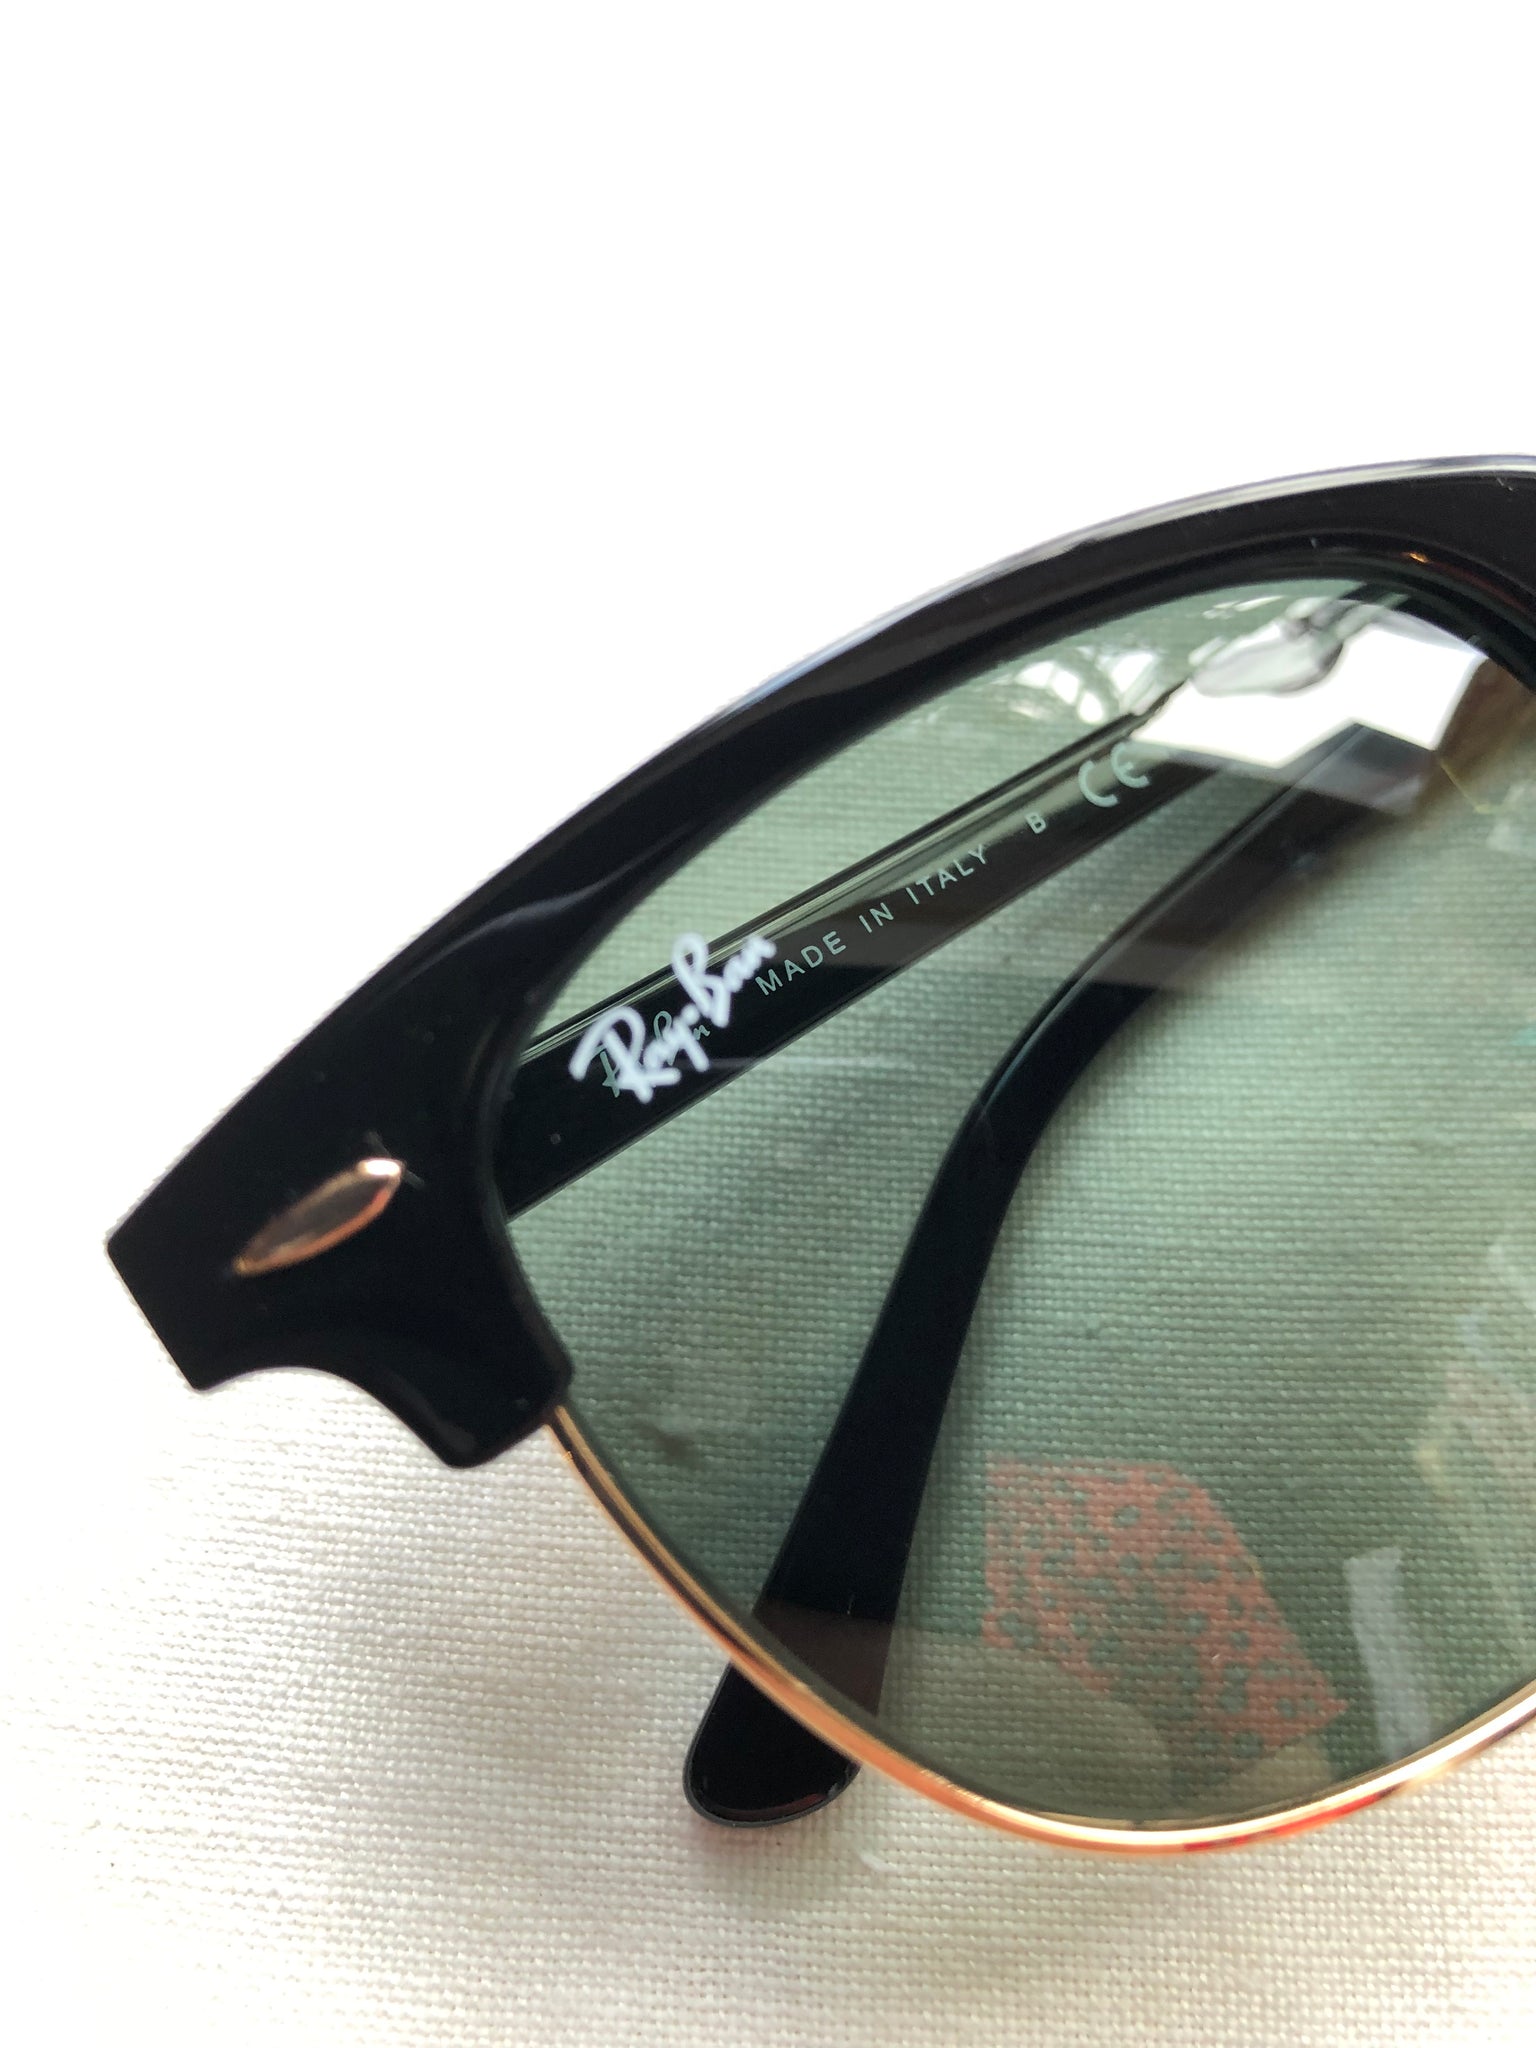 Ray-Ban Classic Clubmaster Sun Glasses, Made in Italy, NWOT – KingsPIER  vintage